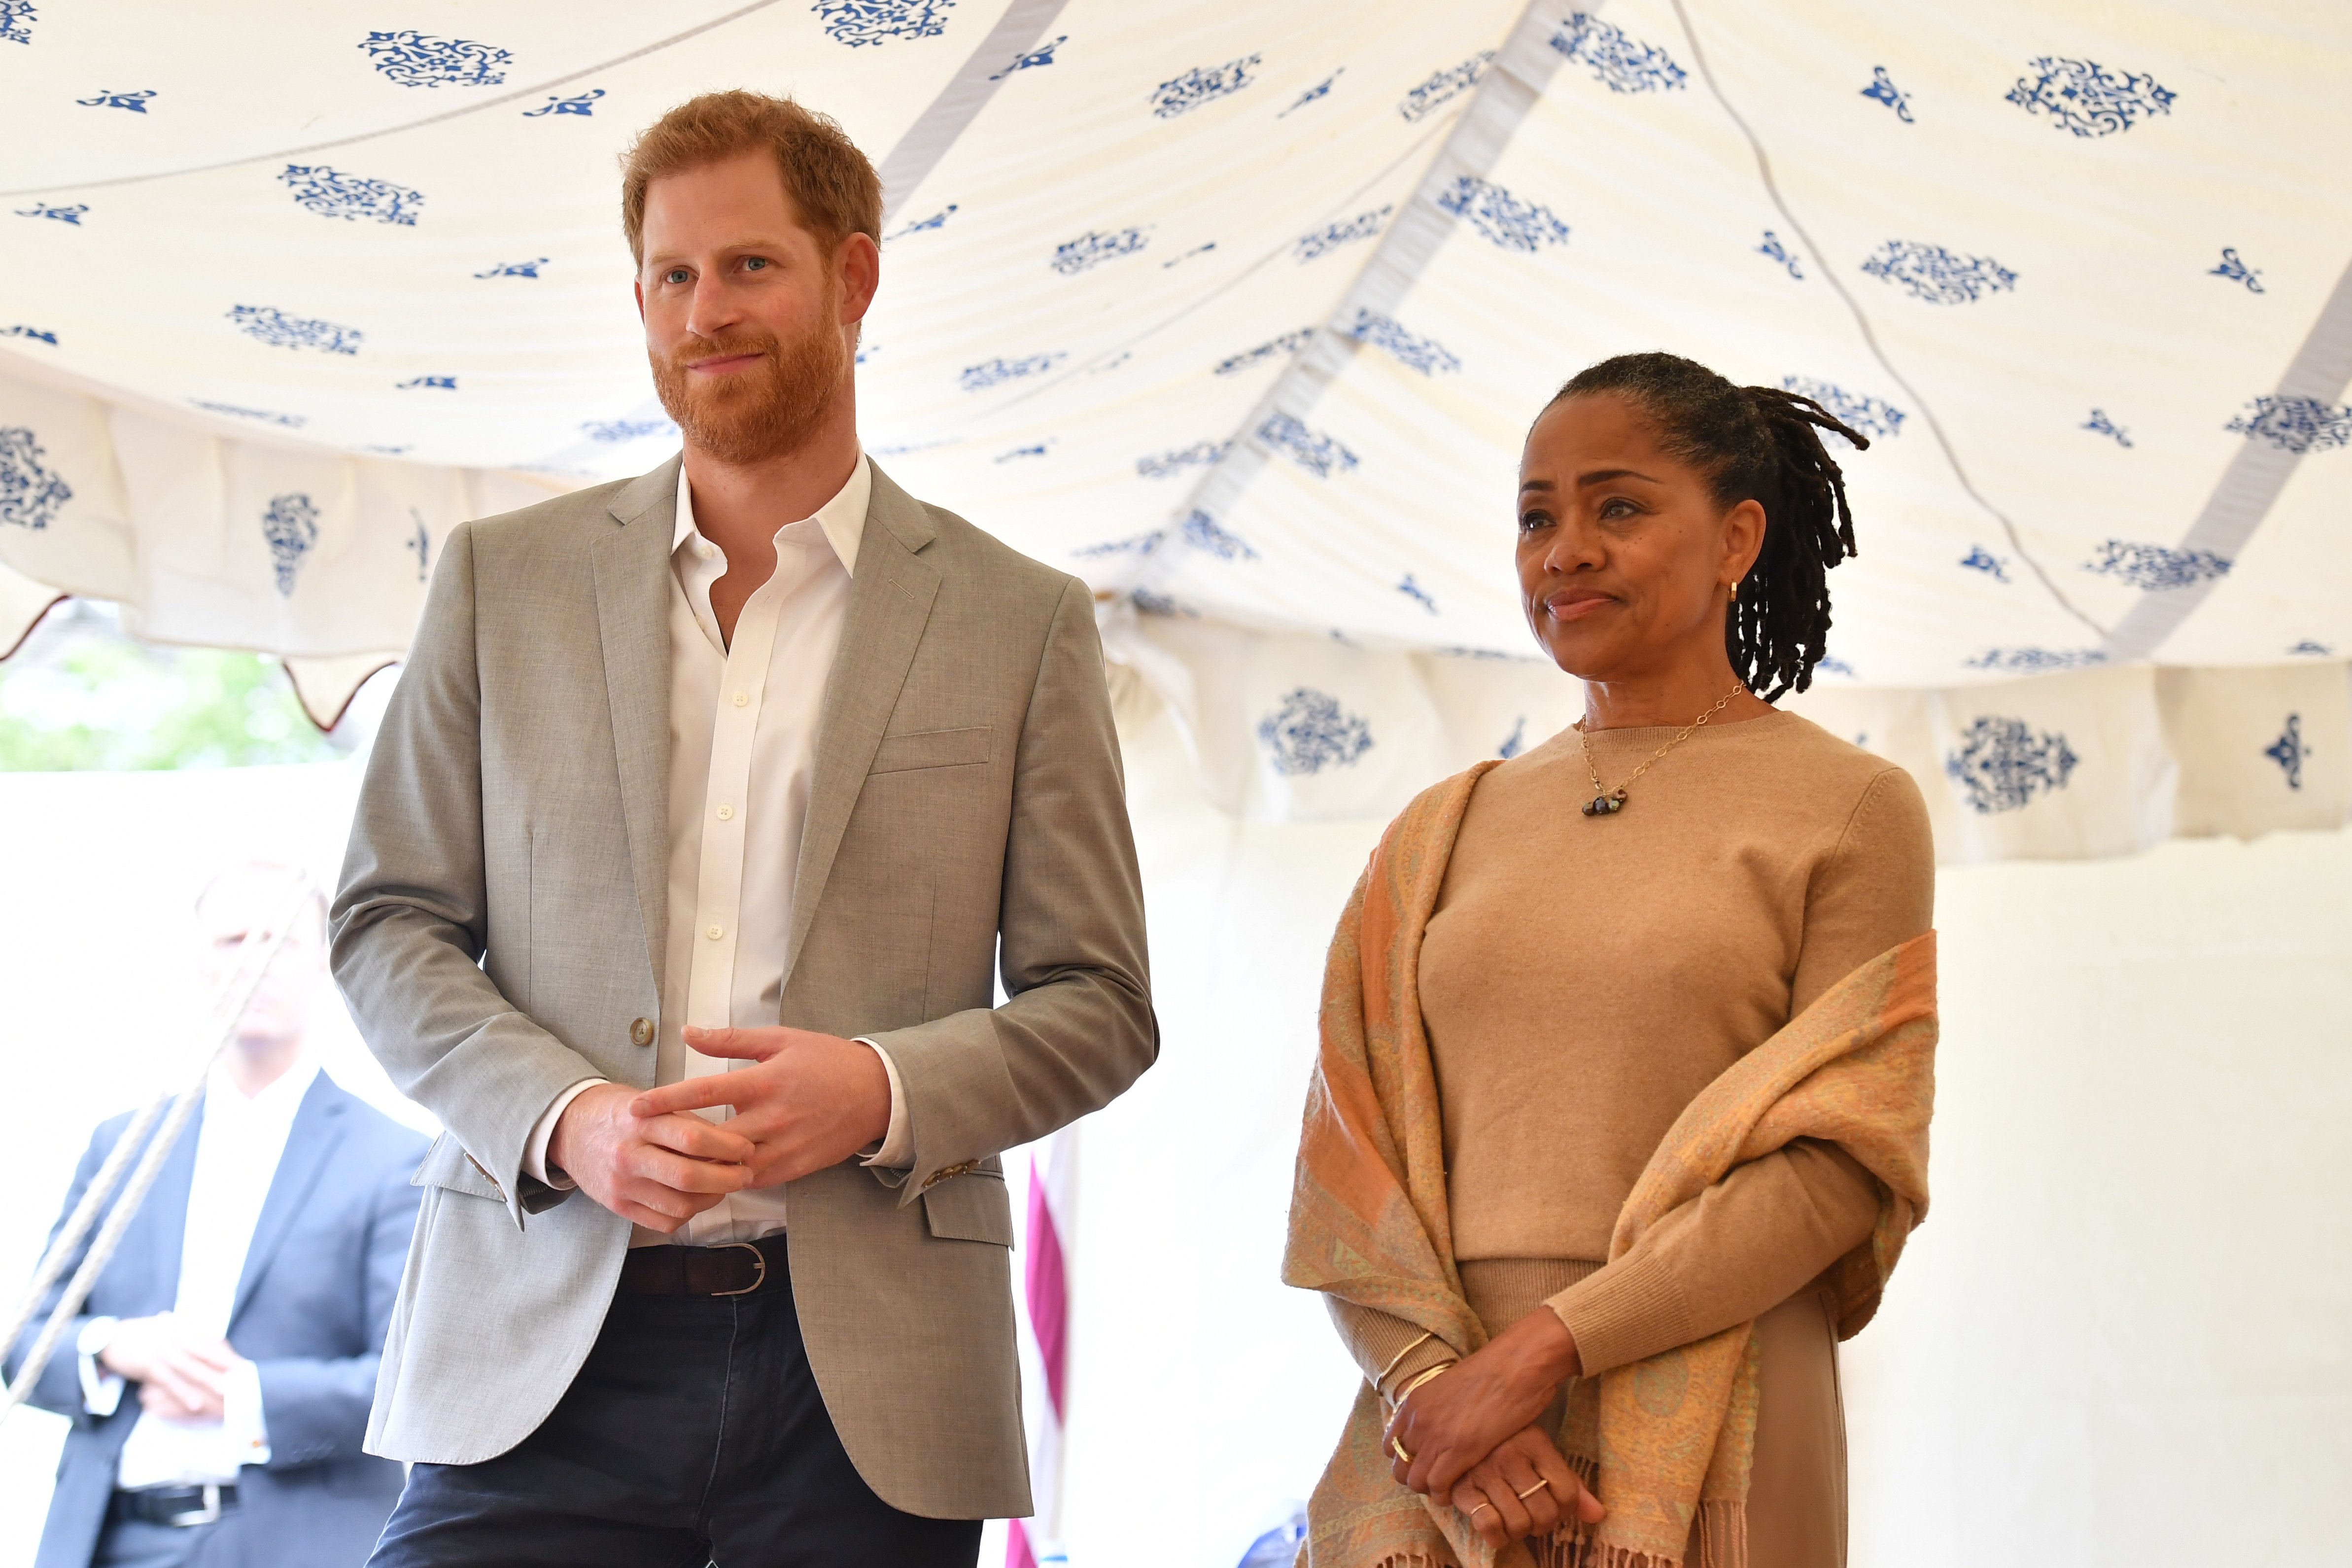 Prince Harry and Doria Ragland and Meghan Markle's book release event in November 2018 | Photo: Getty Images